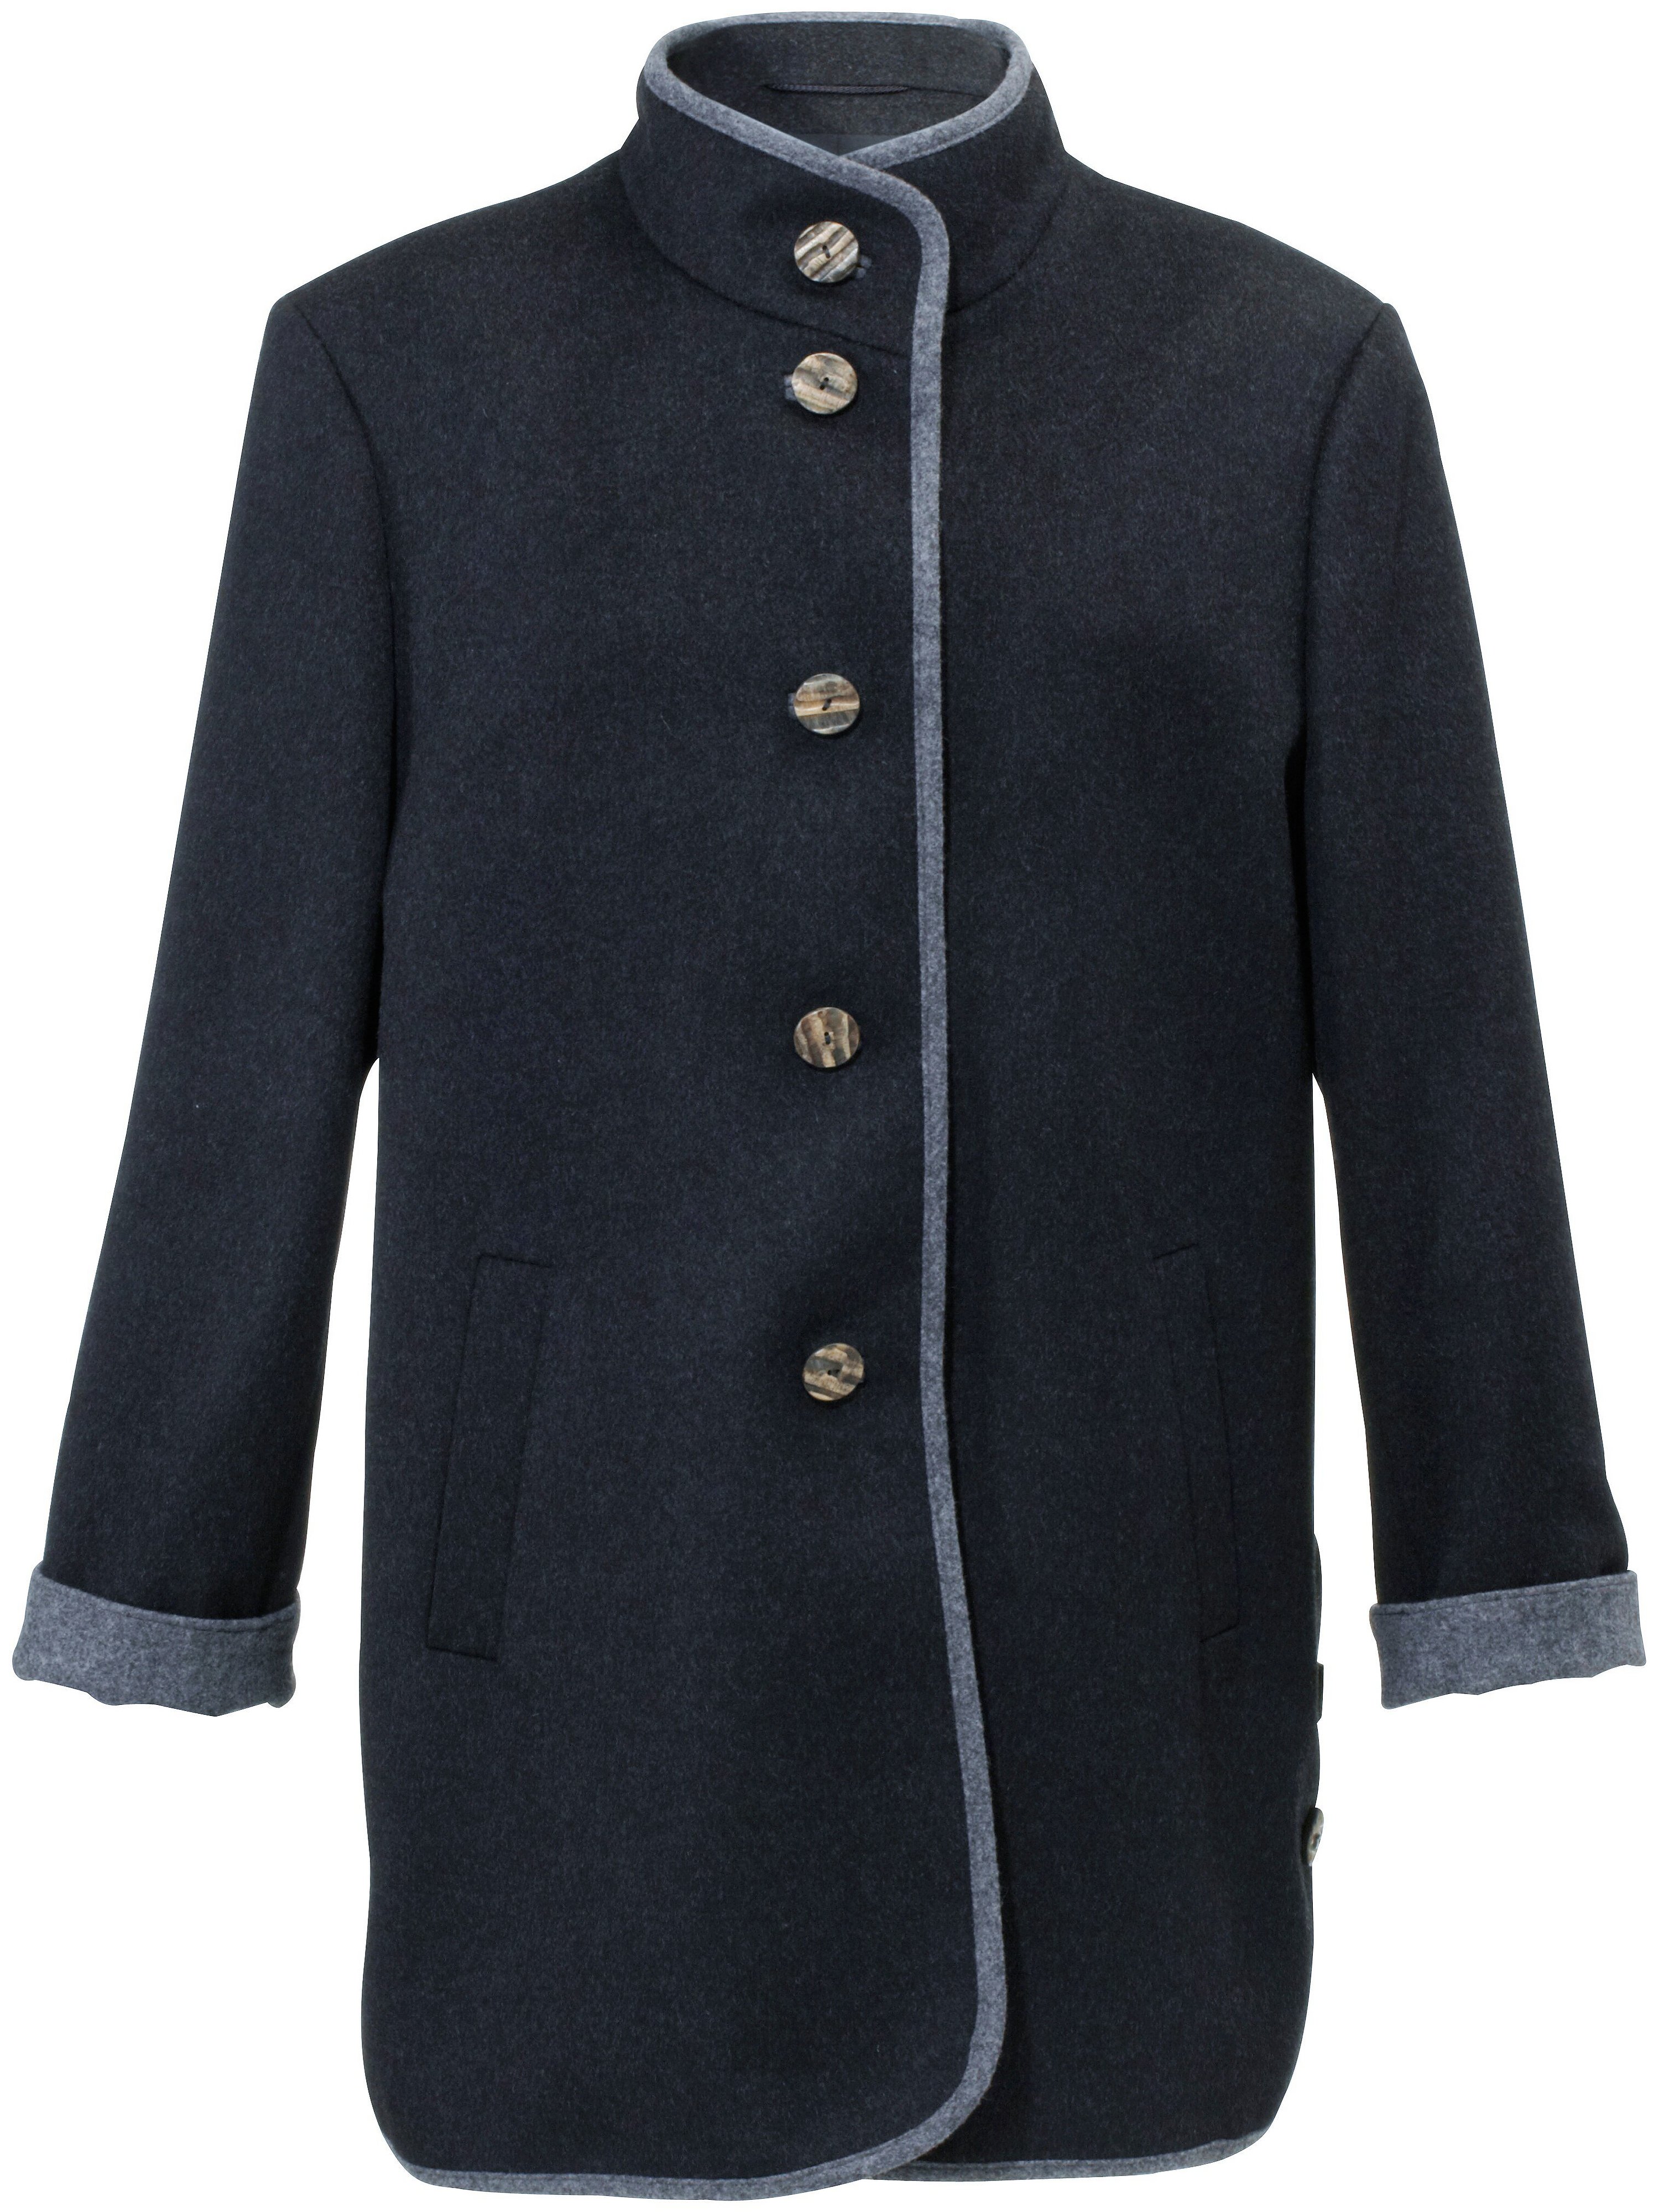 Long loden jacket small stand-up collar Peter Hahn blue